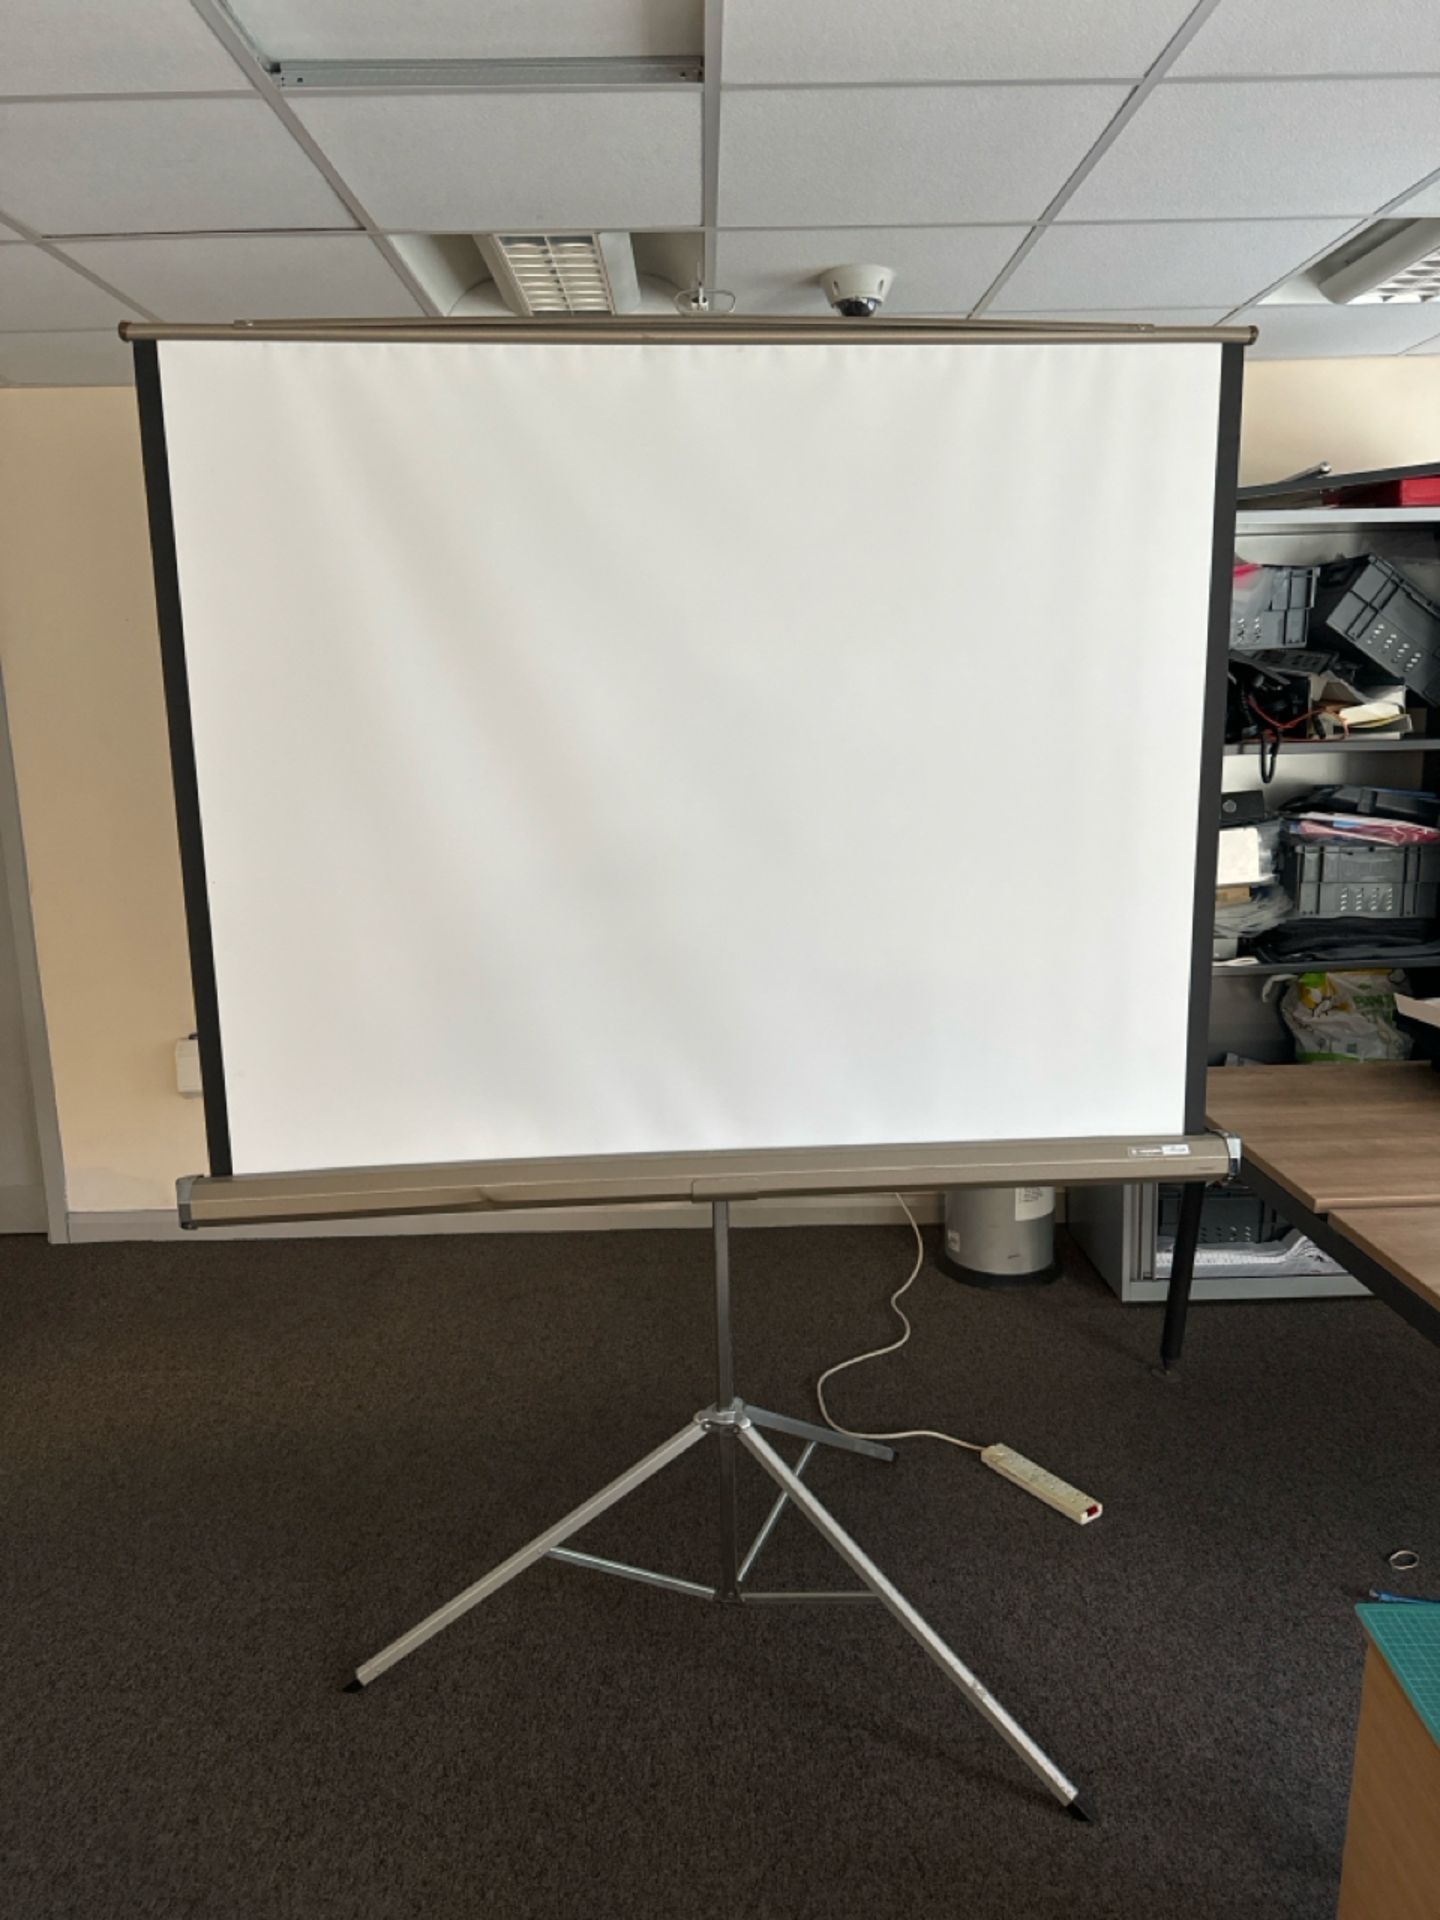 Harkness Miralyte Projector Screen & Stand - Image 2 of 6